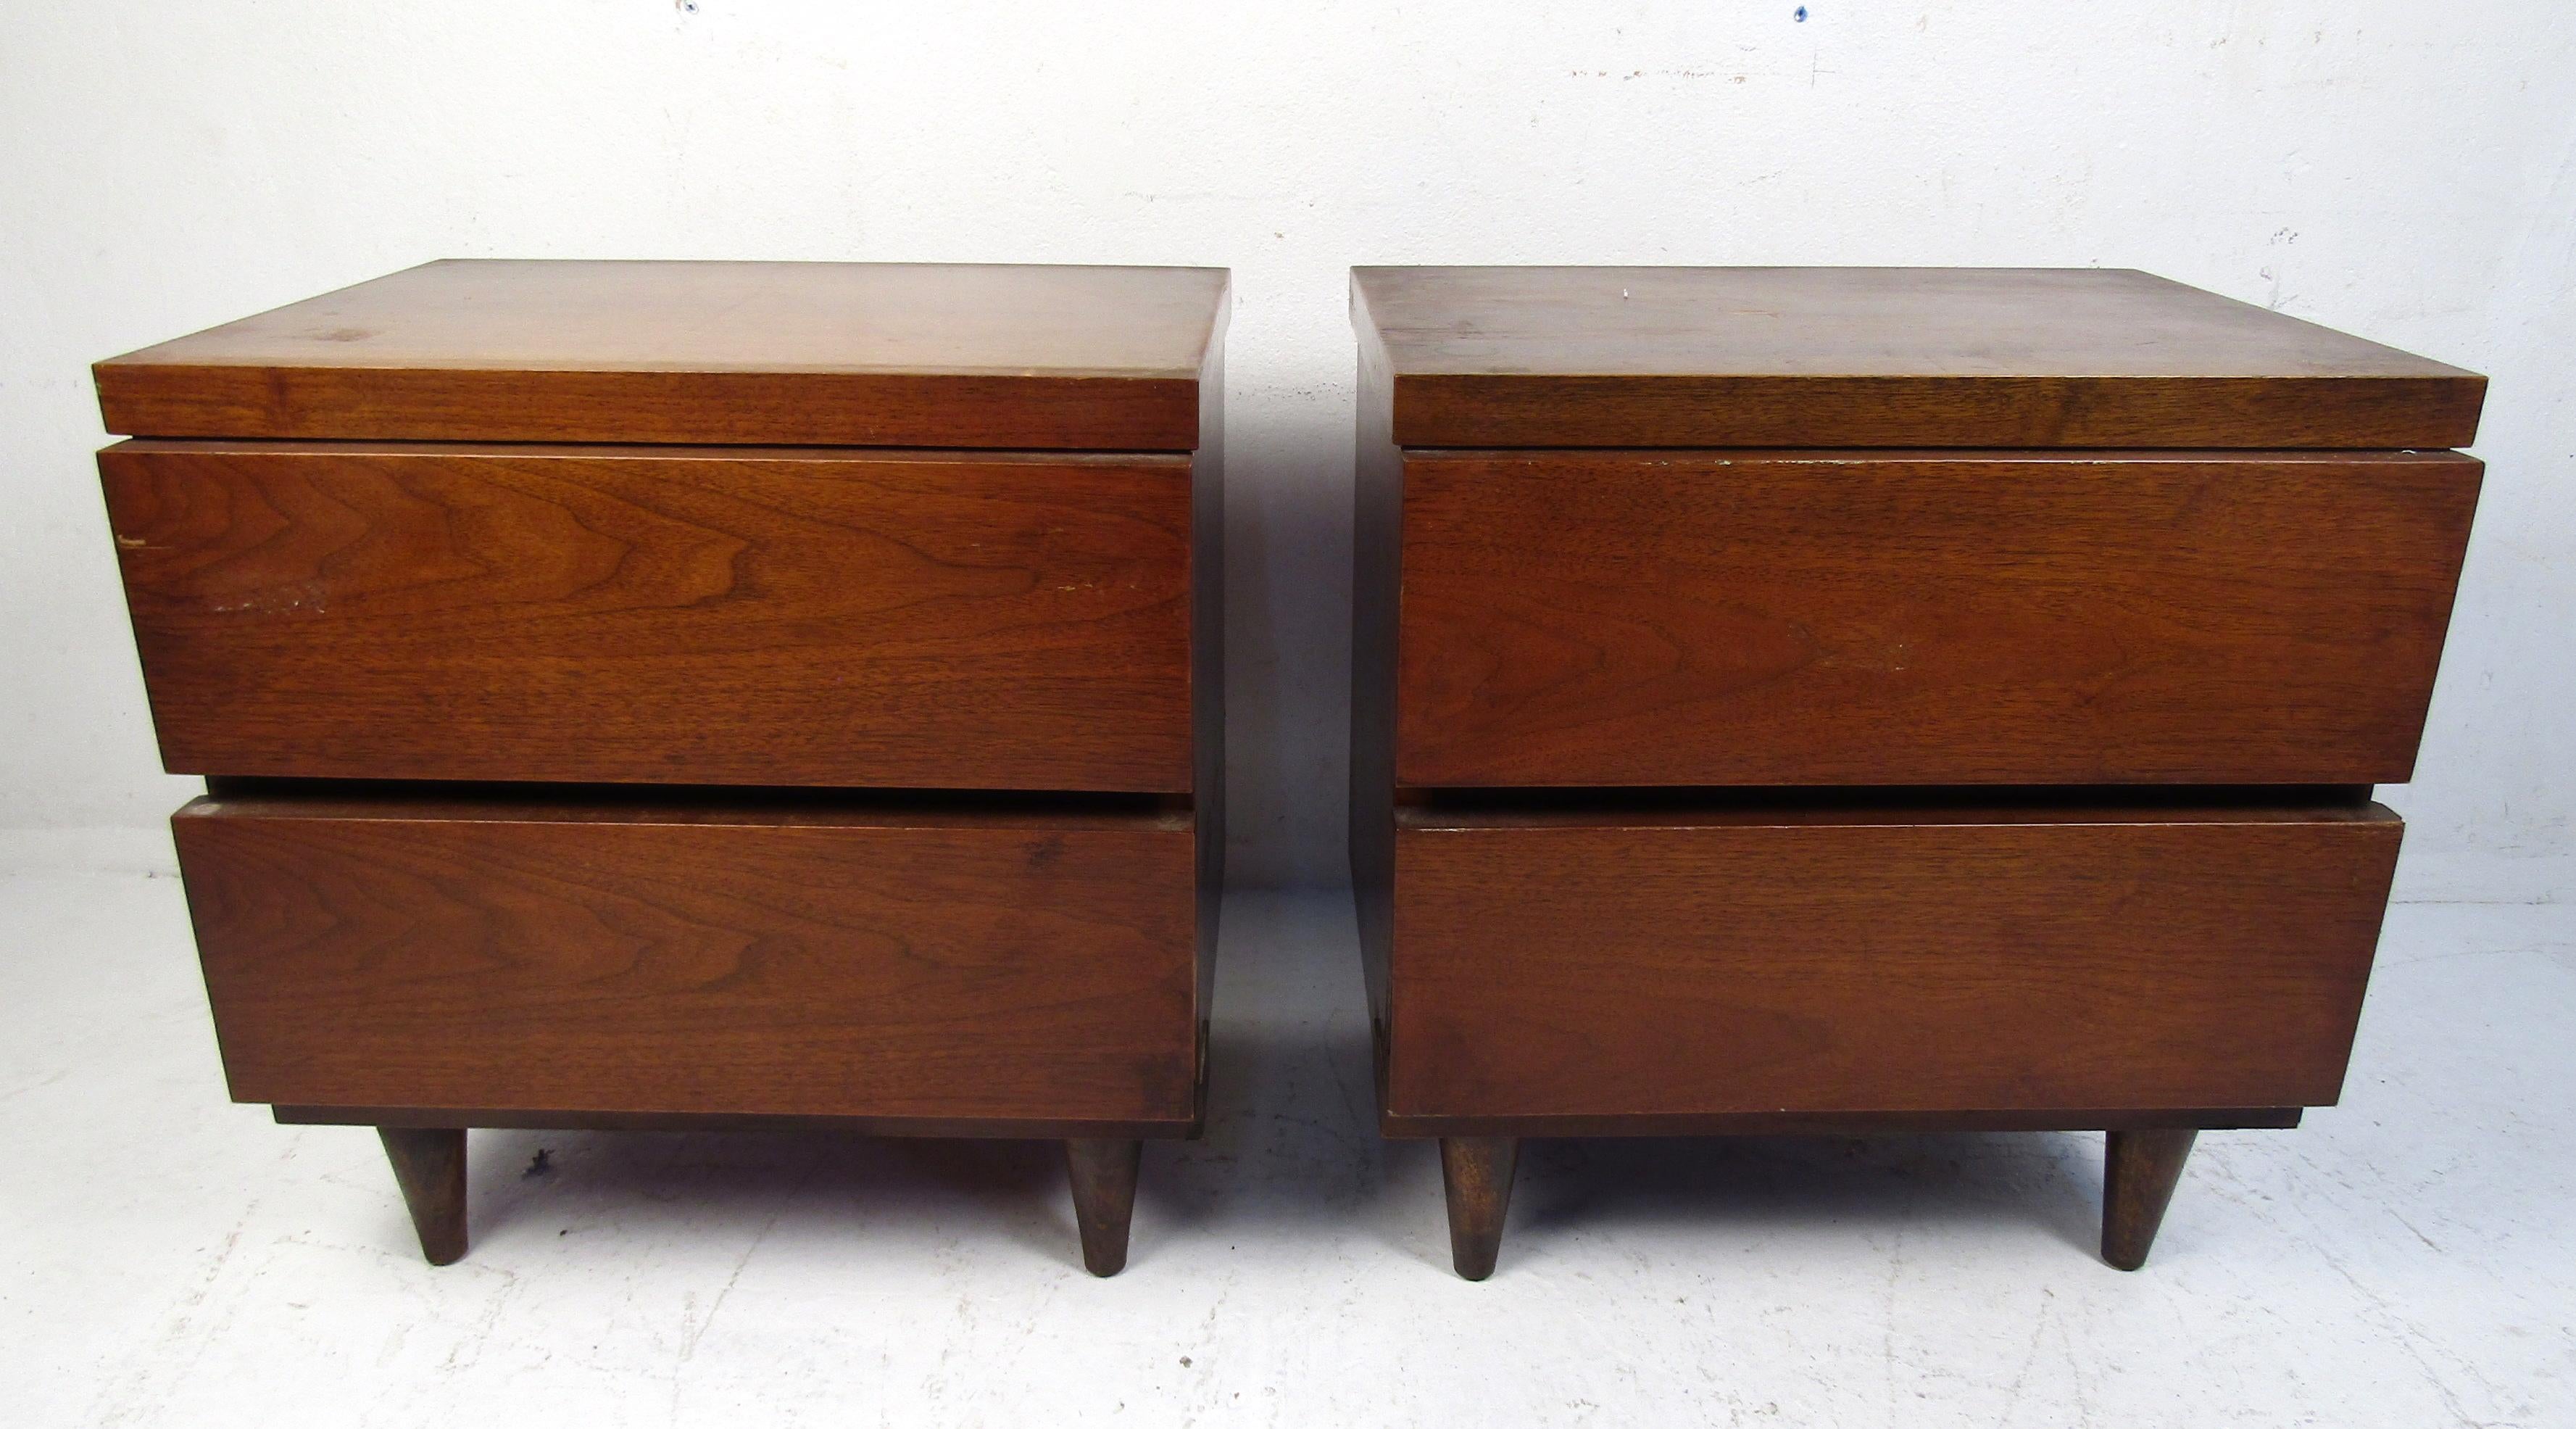 Vintage modern pair of nightstands featuring rich walnut grain, two drawers, and sturdy tapered legs.

Please confirm item location (NJ or BK).